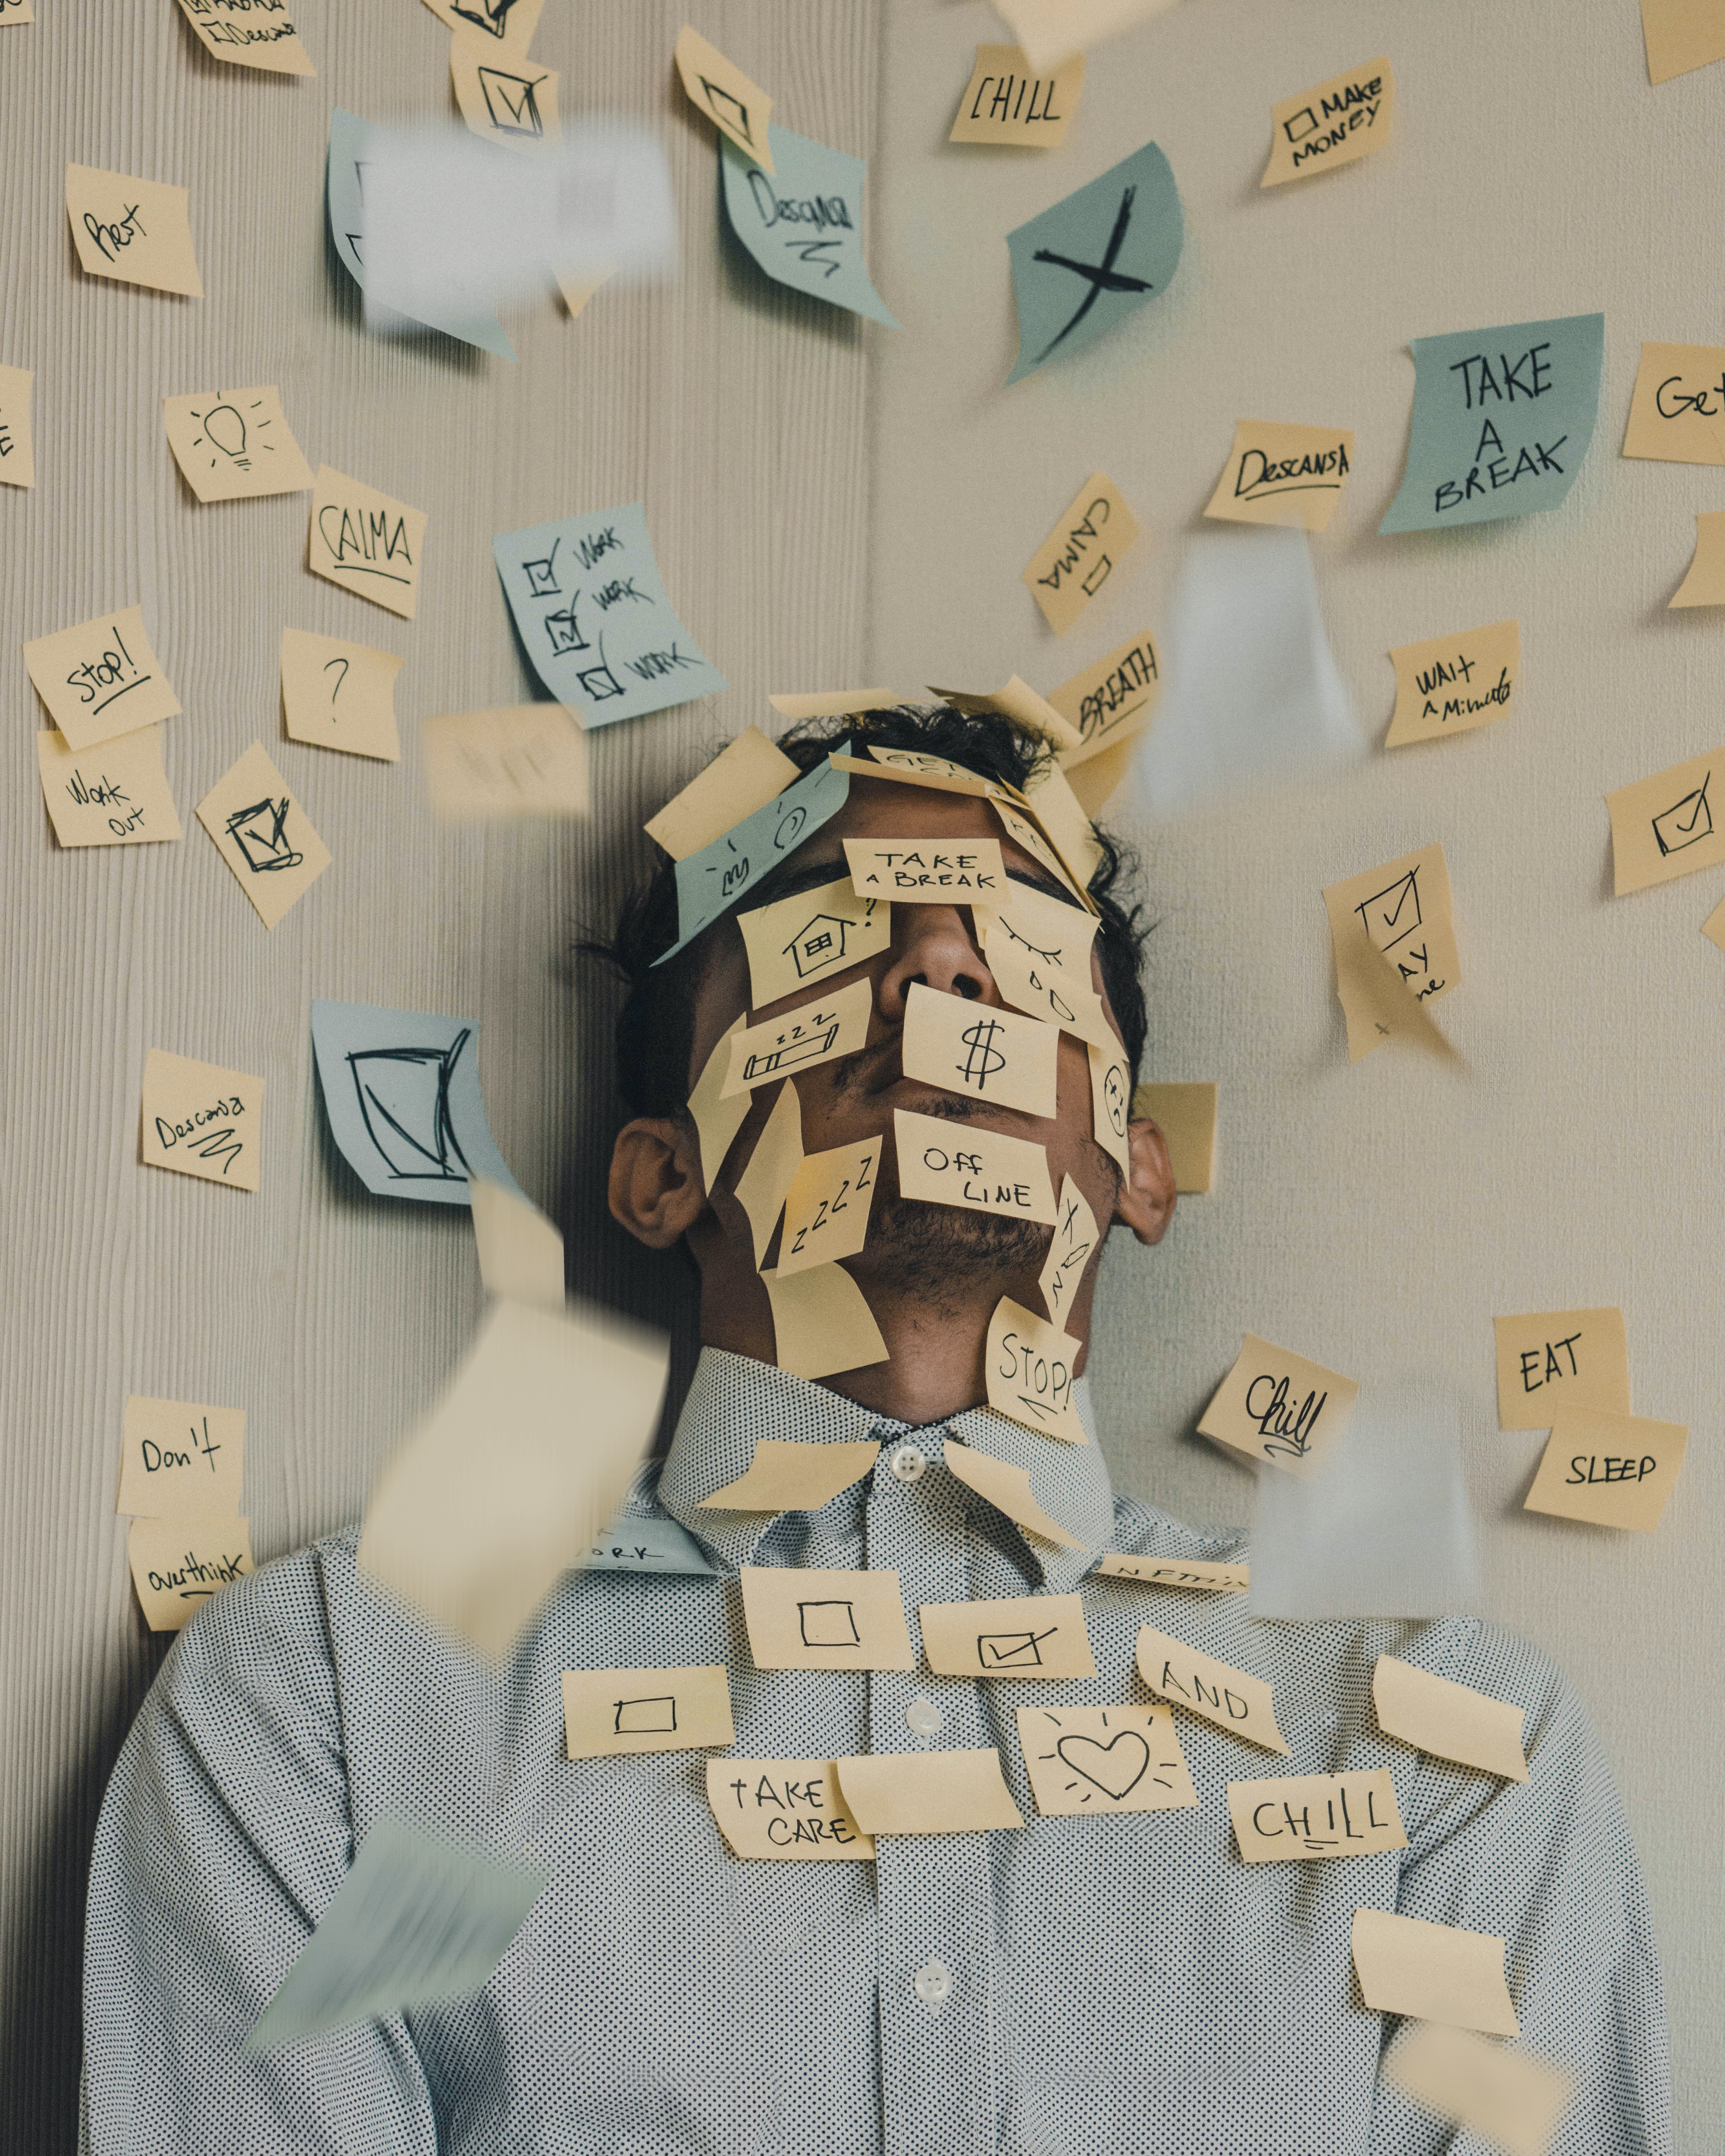 Image shows a man covered with a plethora of post-it notes all scribbled on.